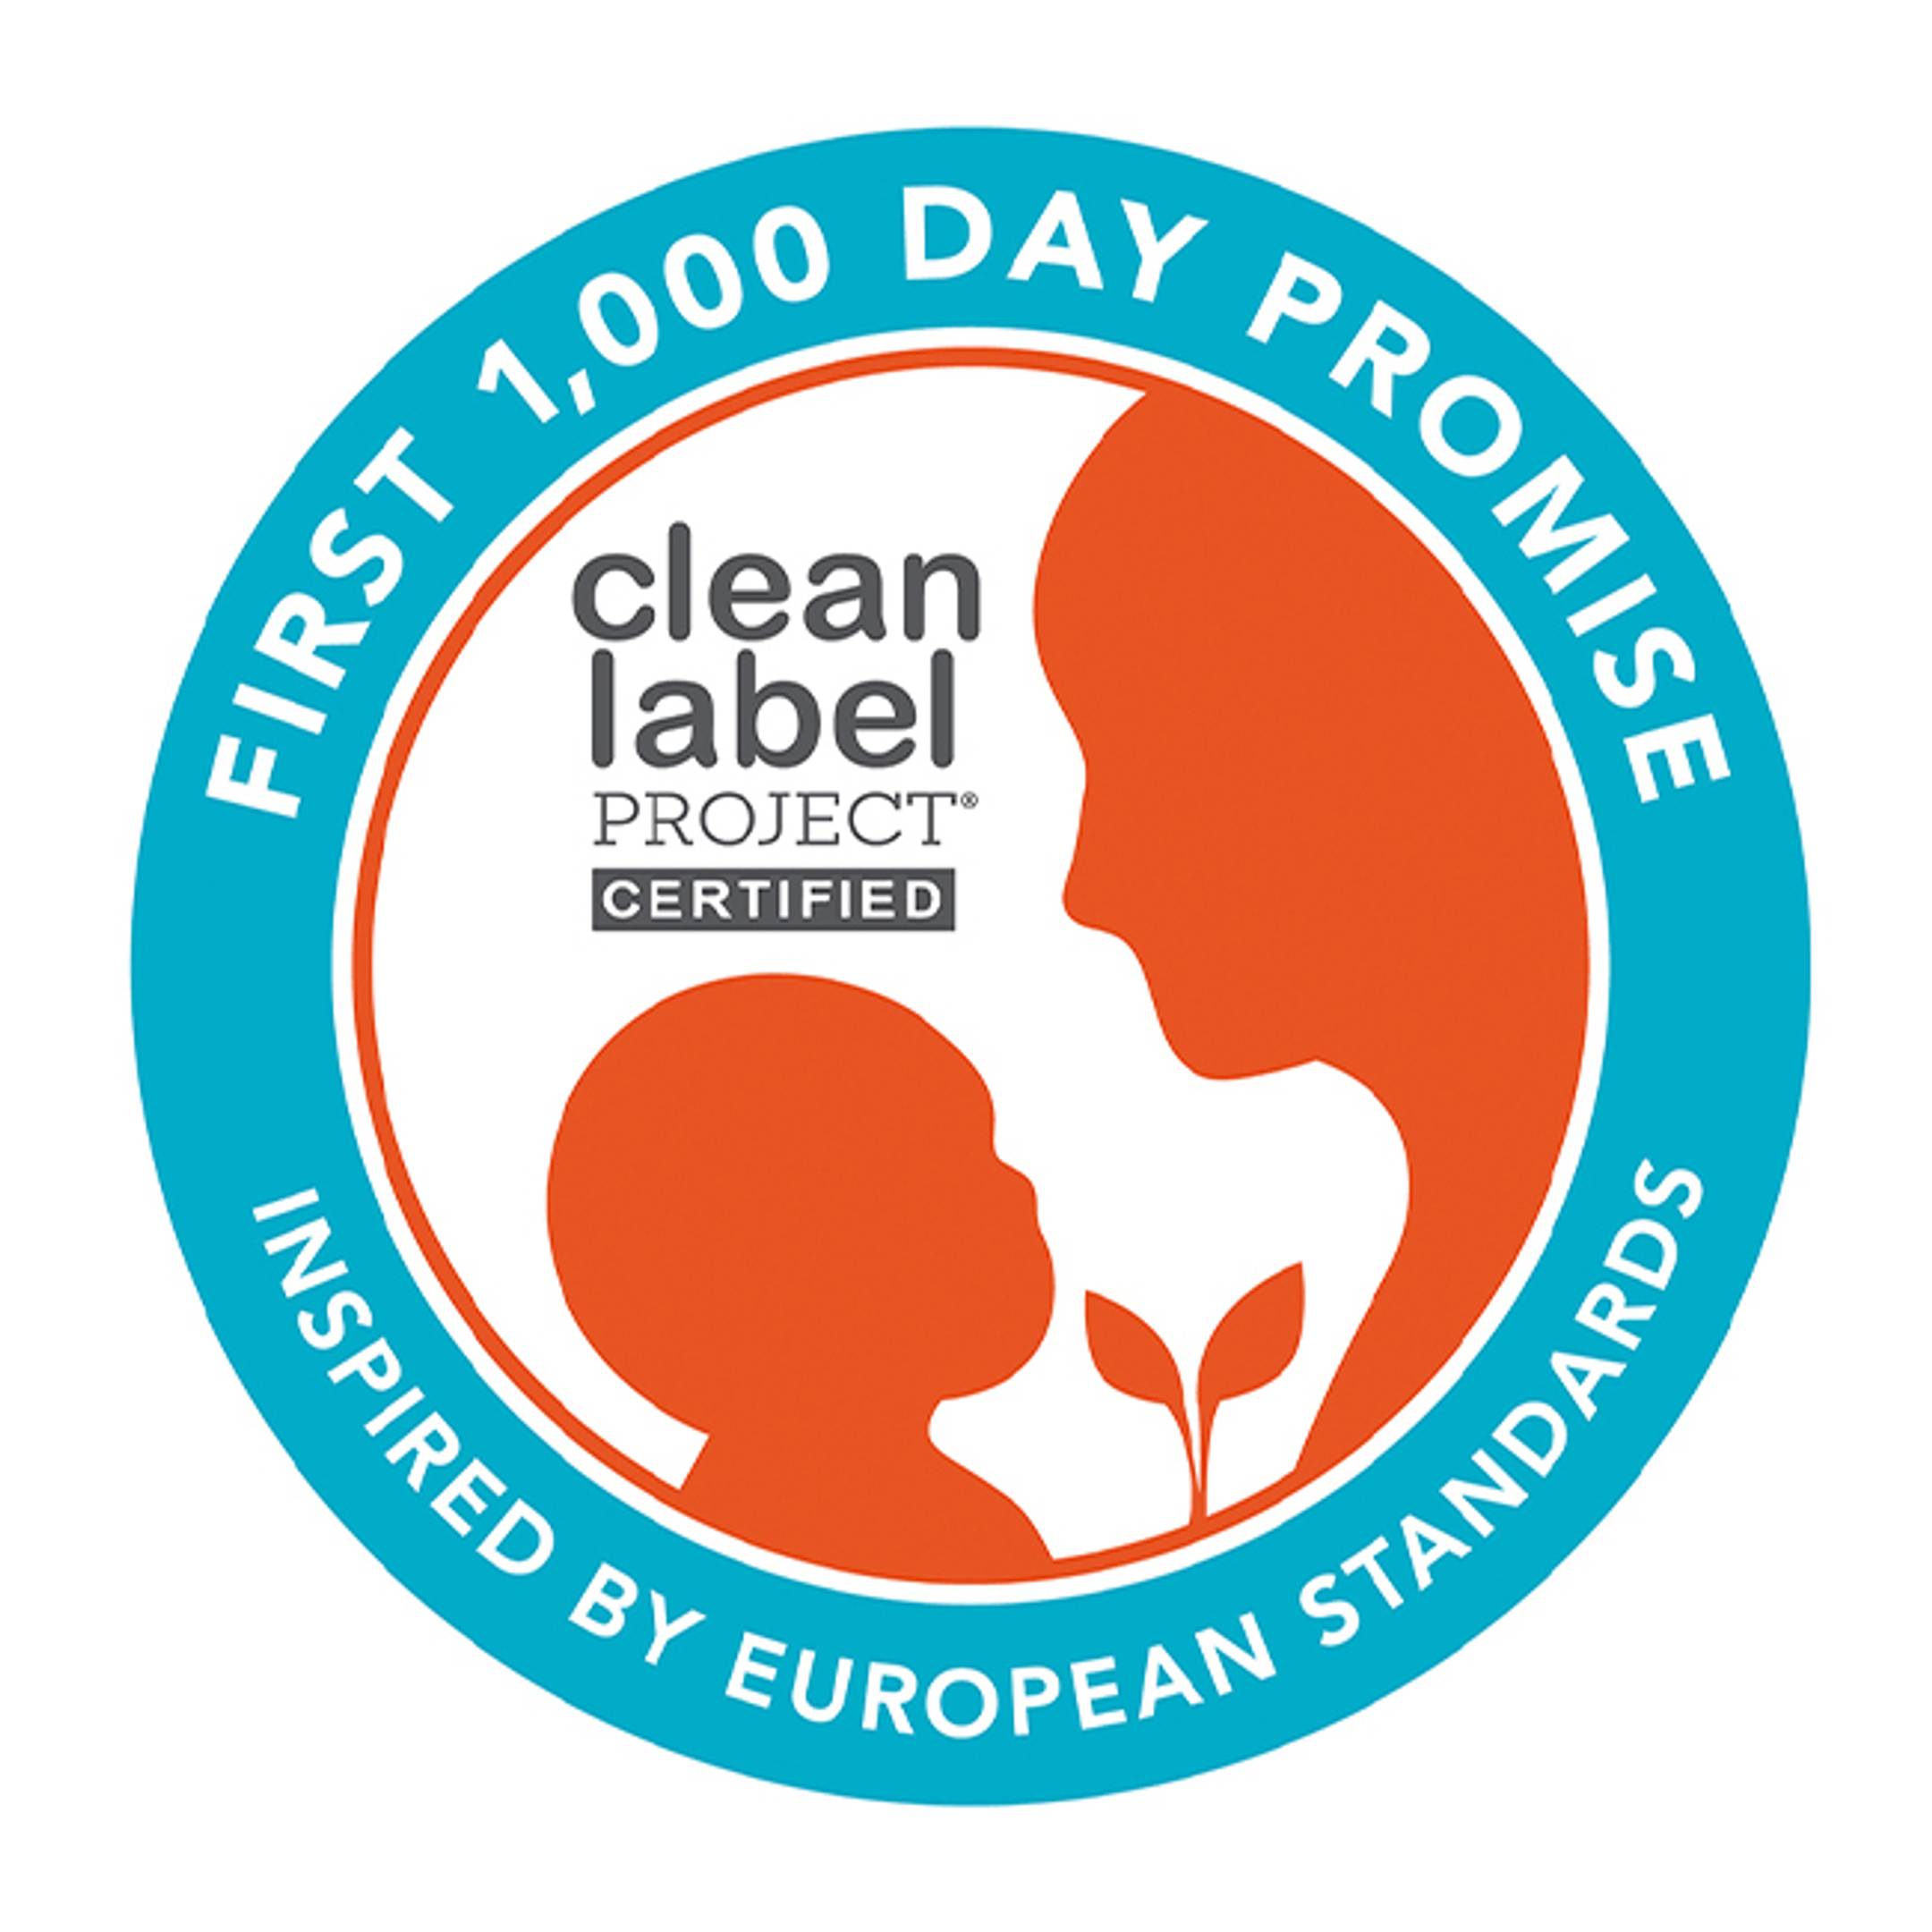 First 1,000 Day Promise logo